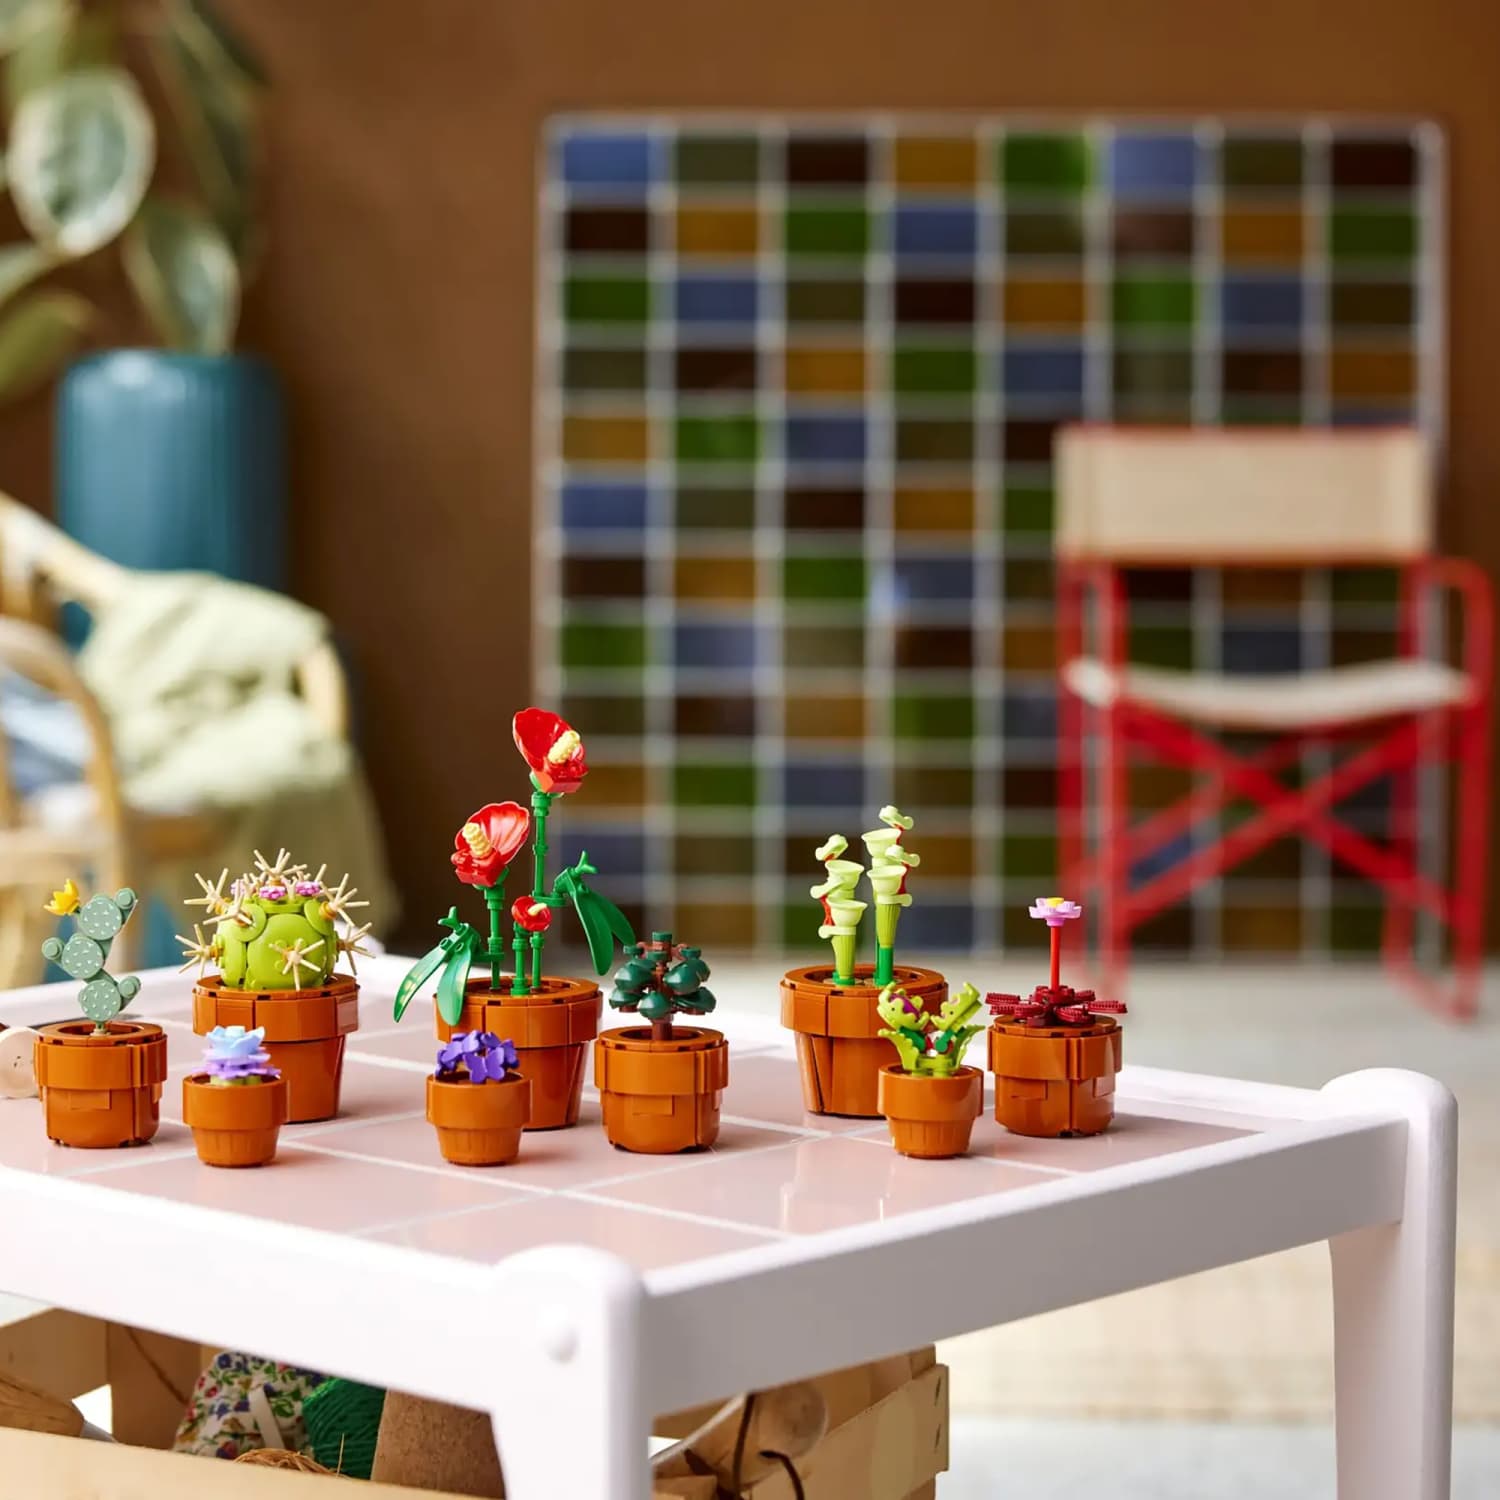 How To Build 3 Lego Cacti! 